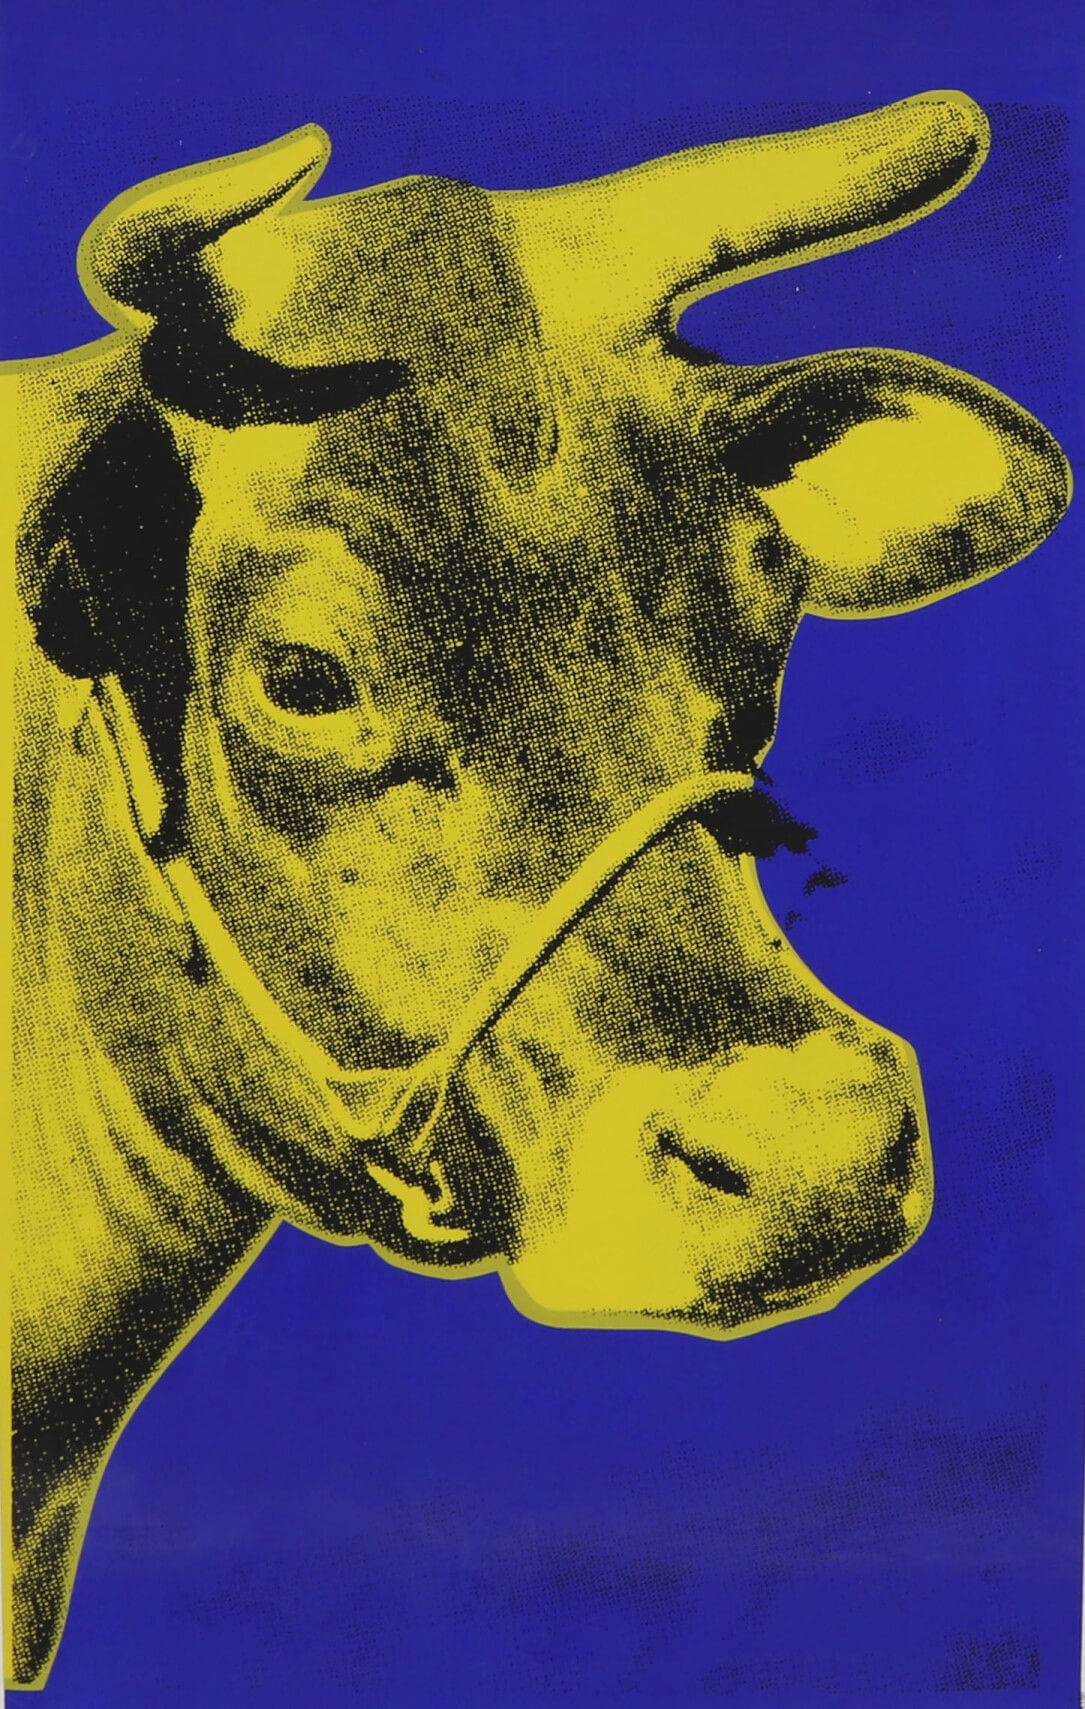 Cow by Andy Warhol, 1976